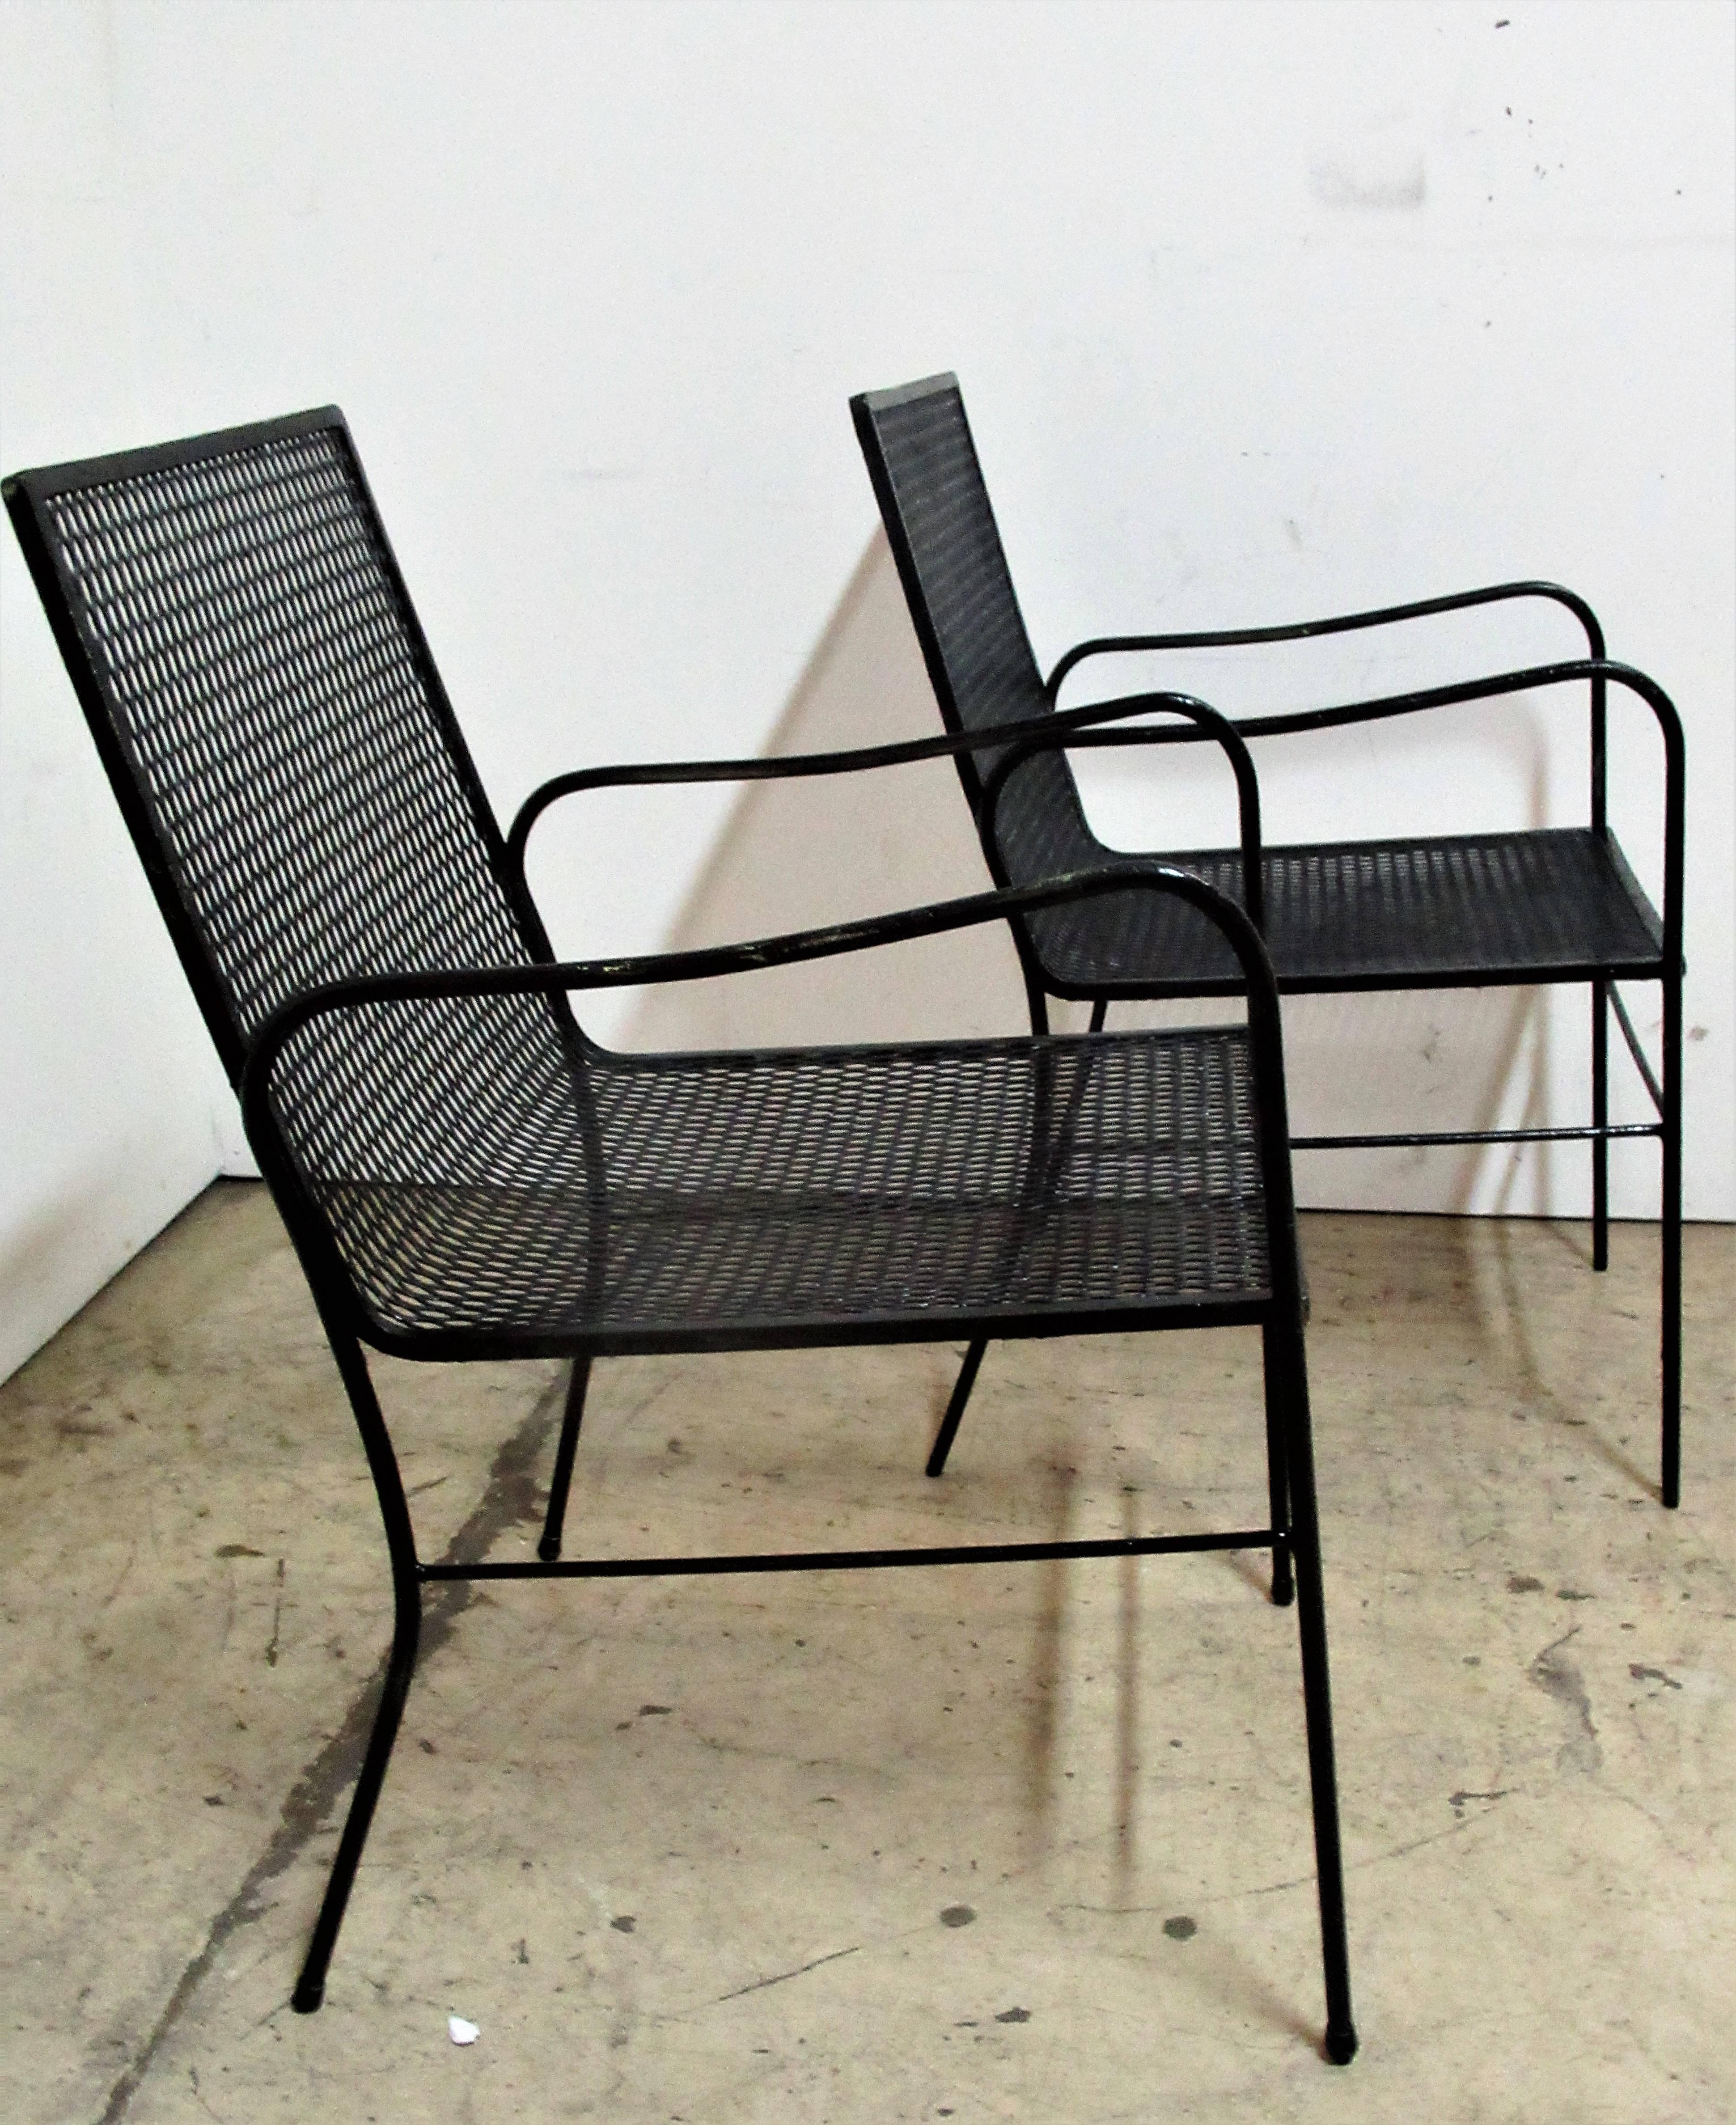  Wrought Iron Mesh Patio Set in the style of Mathieu Mategot 2